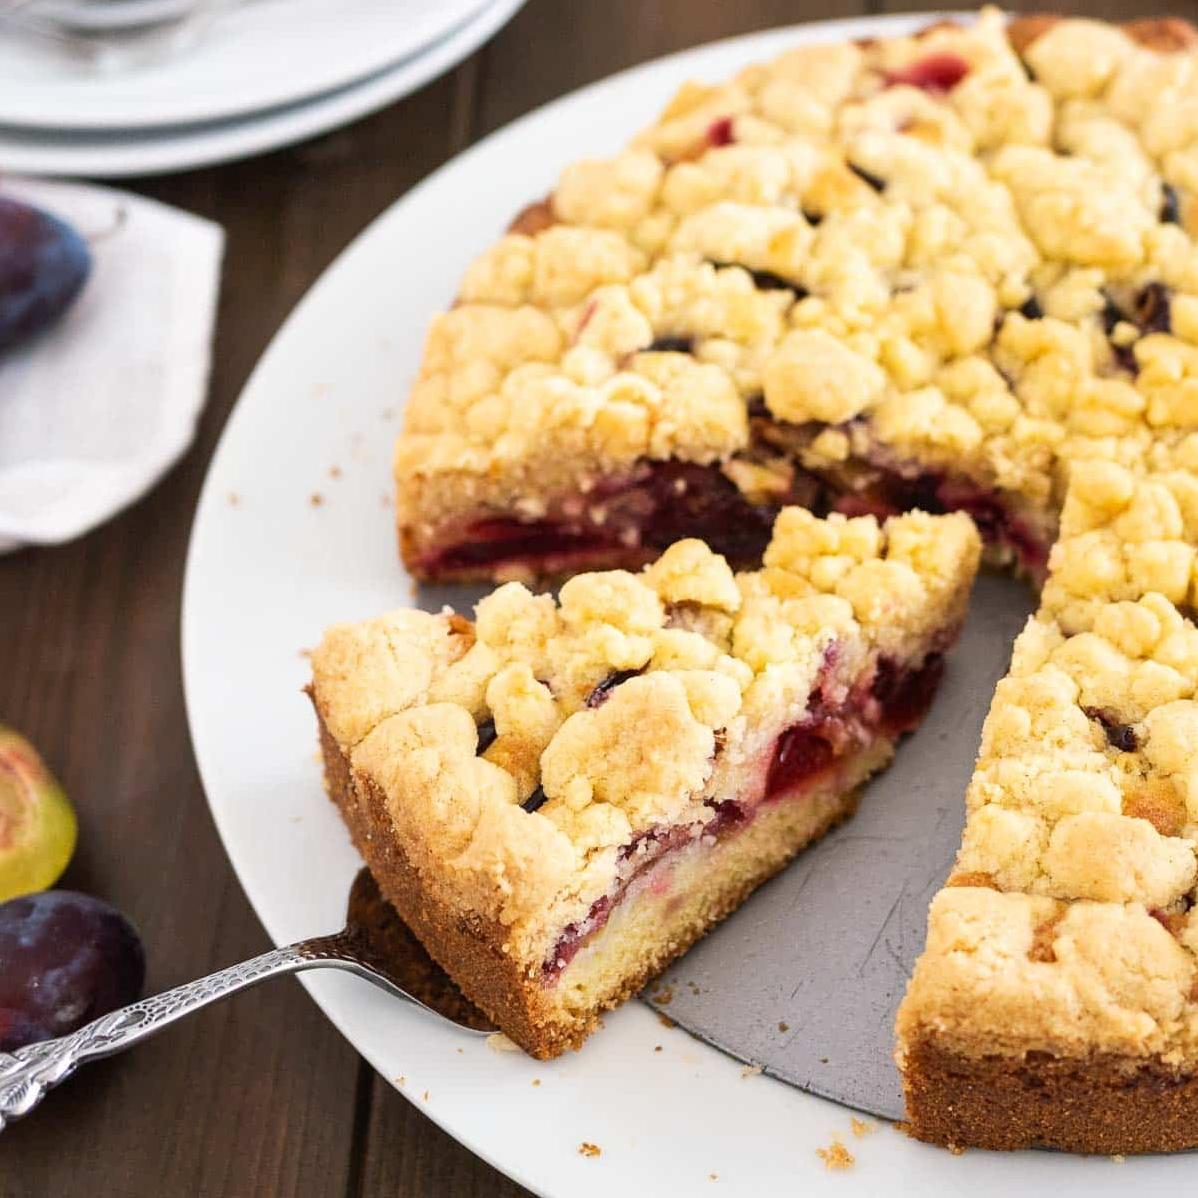  Sweet and tangy German Plum Coffee Cake with a crunchy almond topping